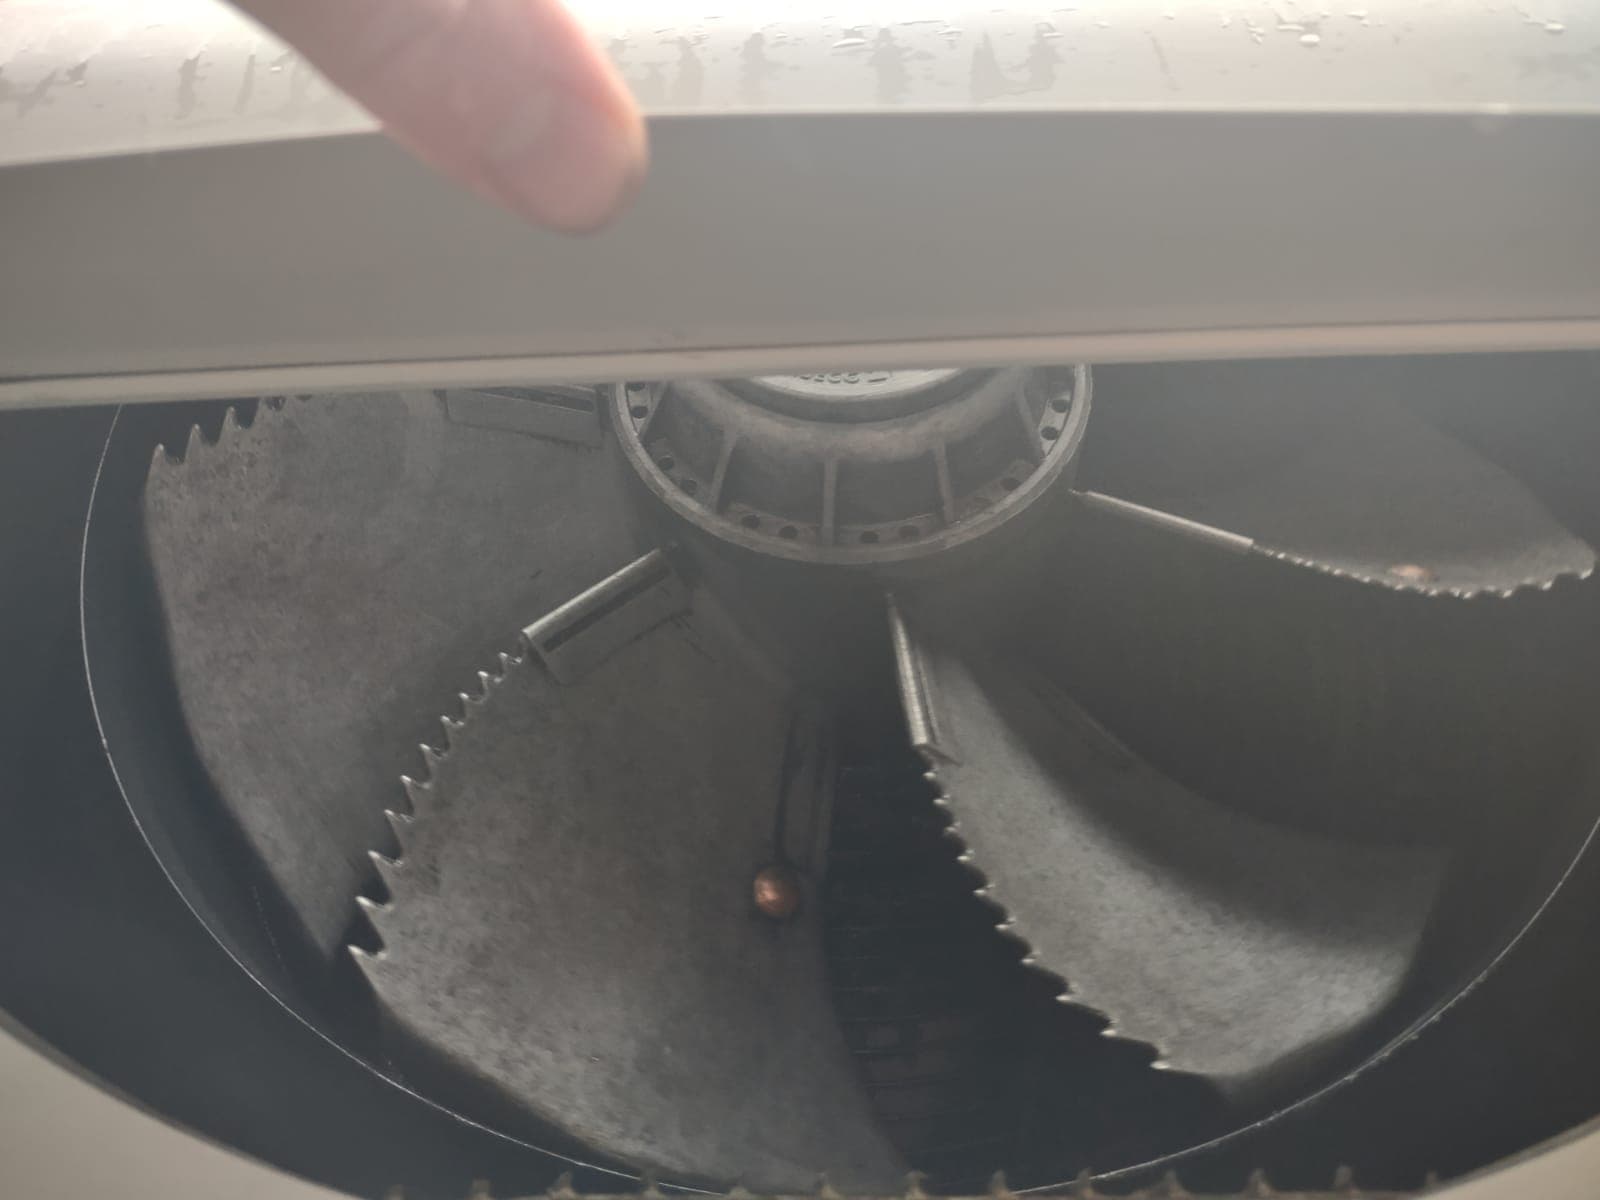 Extractor fan Cleaning Newcastle